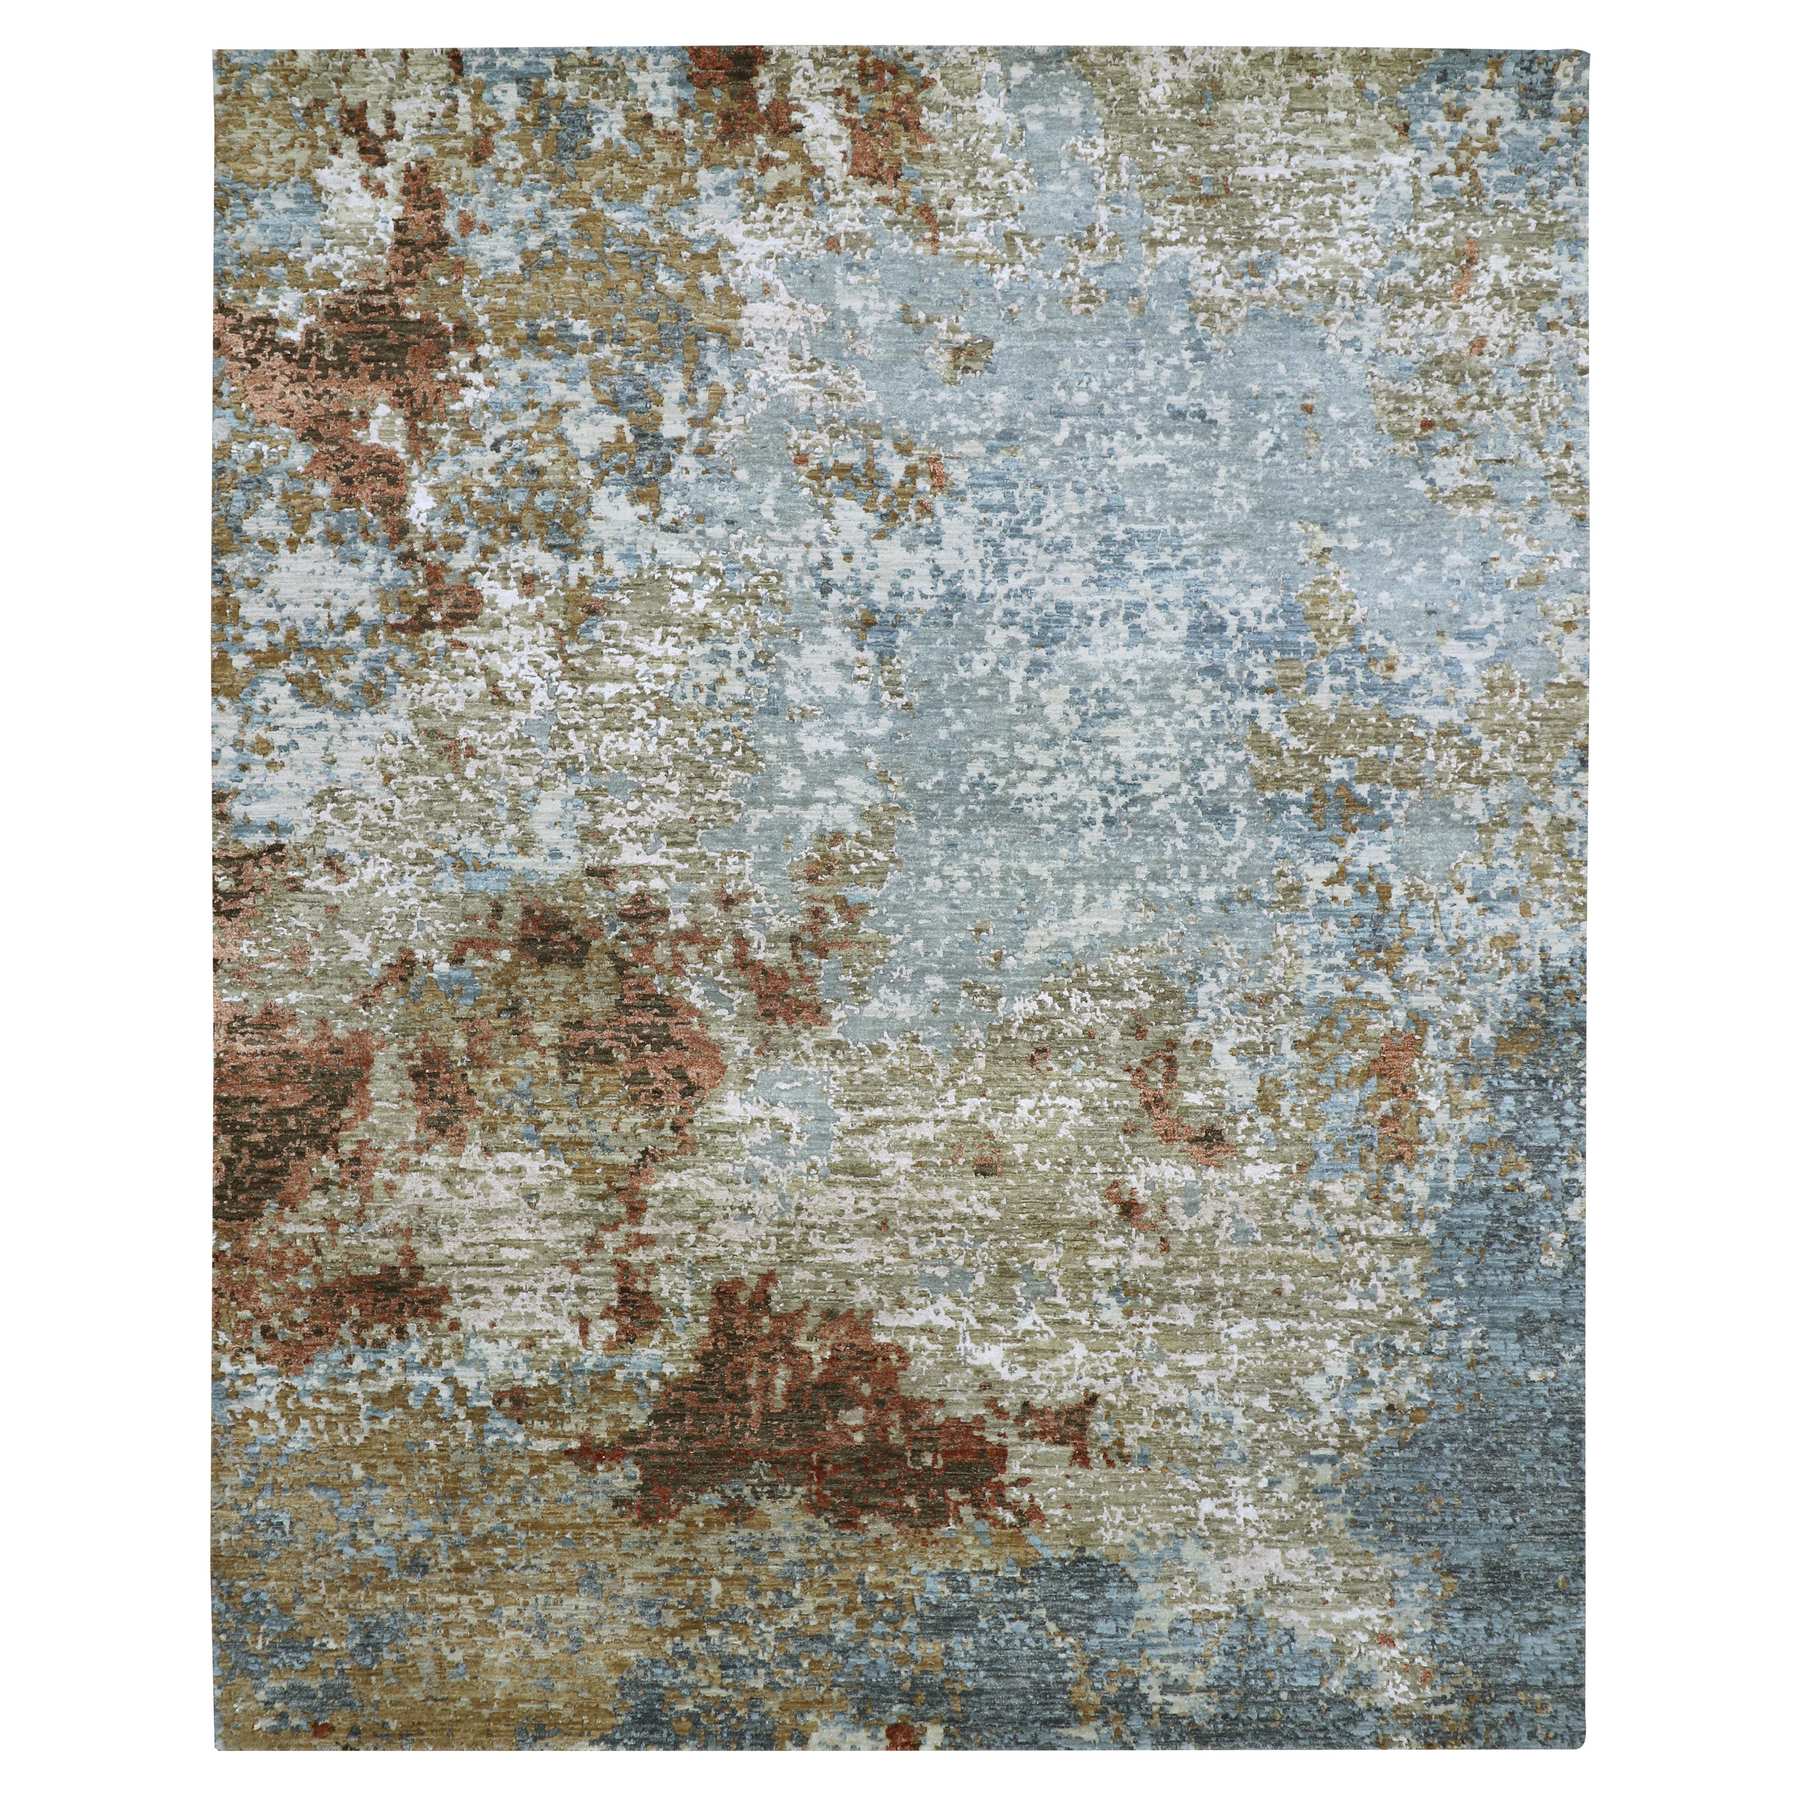 Neutral Gray With Mix of Gold, Hand Knotted, Densely Woven, Pure Wool Abstract Design Oriental Rug